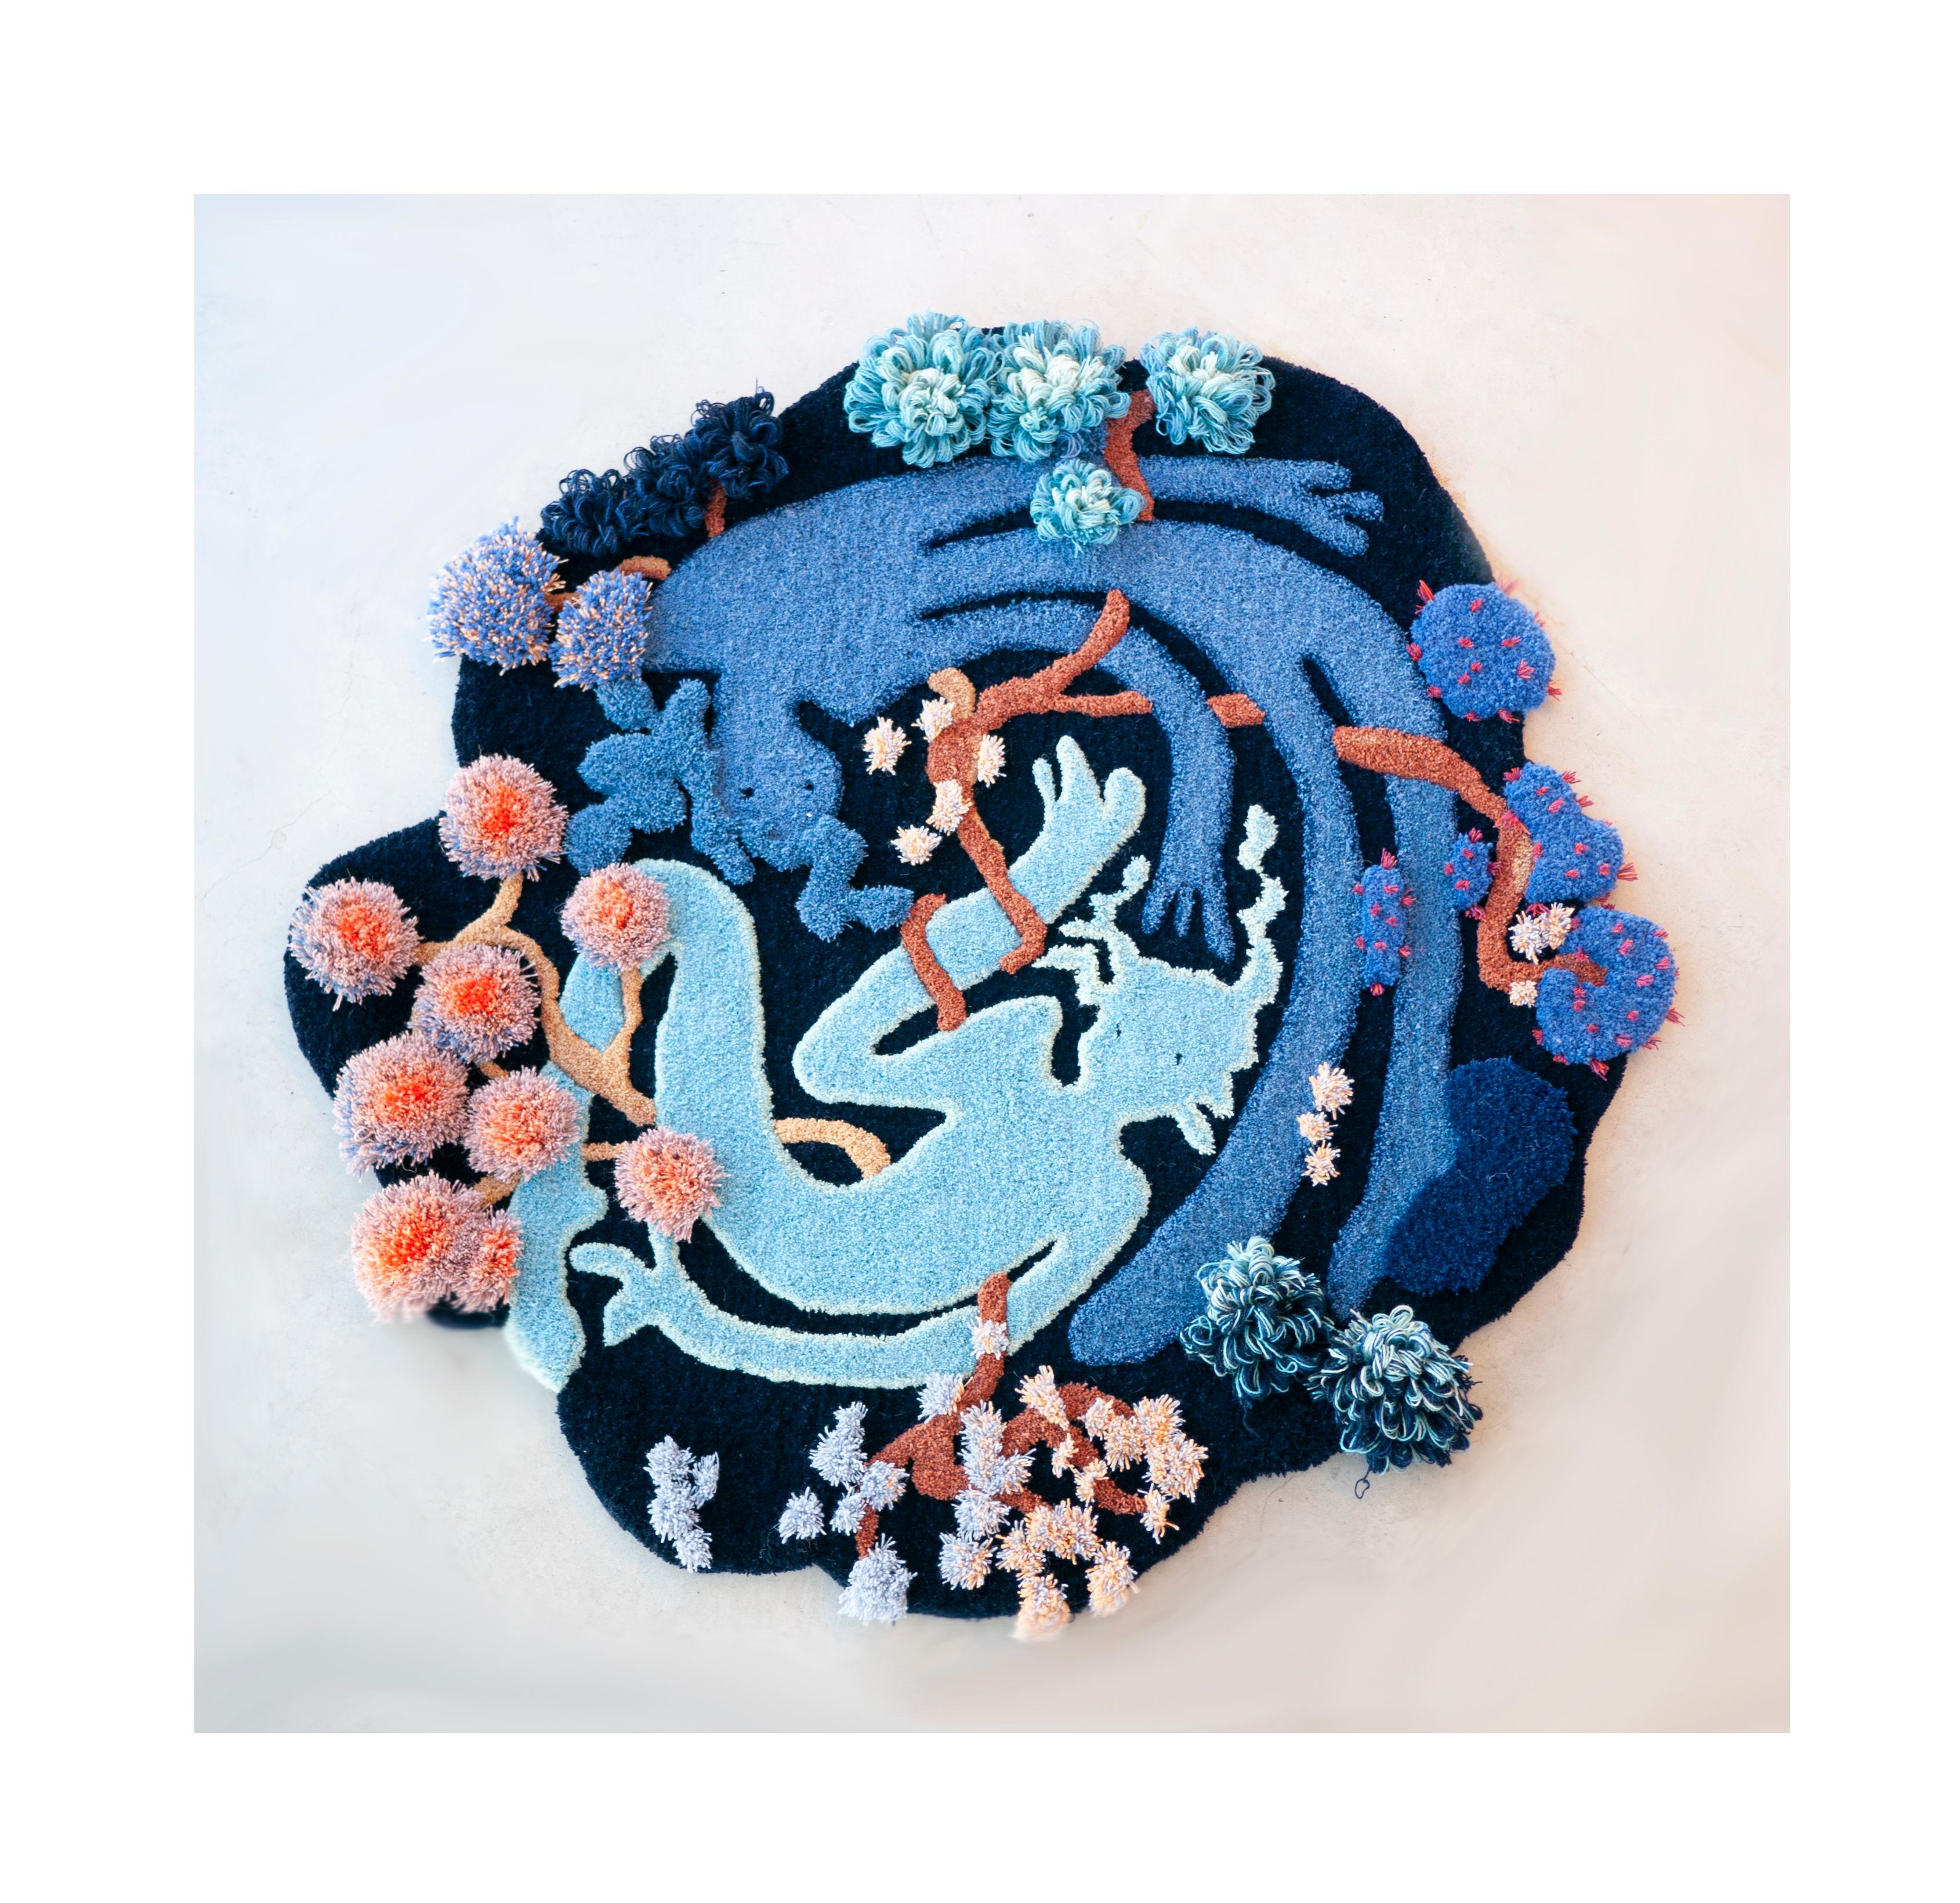 Midnight Embrace is a soft wall sculpture. The guardian angels of frinds, through the darkest of night. A small touch will make the flowers bloom again.
Sold as rug, but can on request come with hanging system.

Hand tufted and embroidered wool.